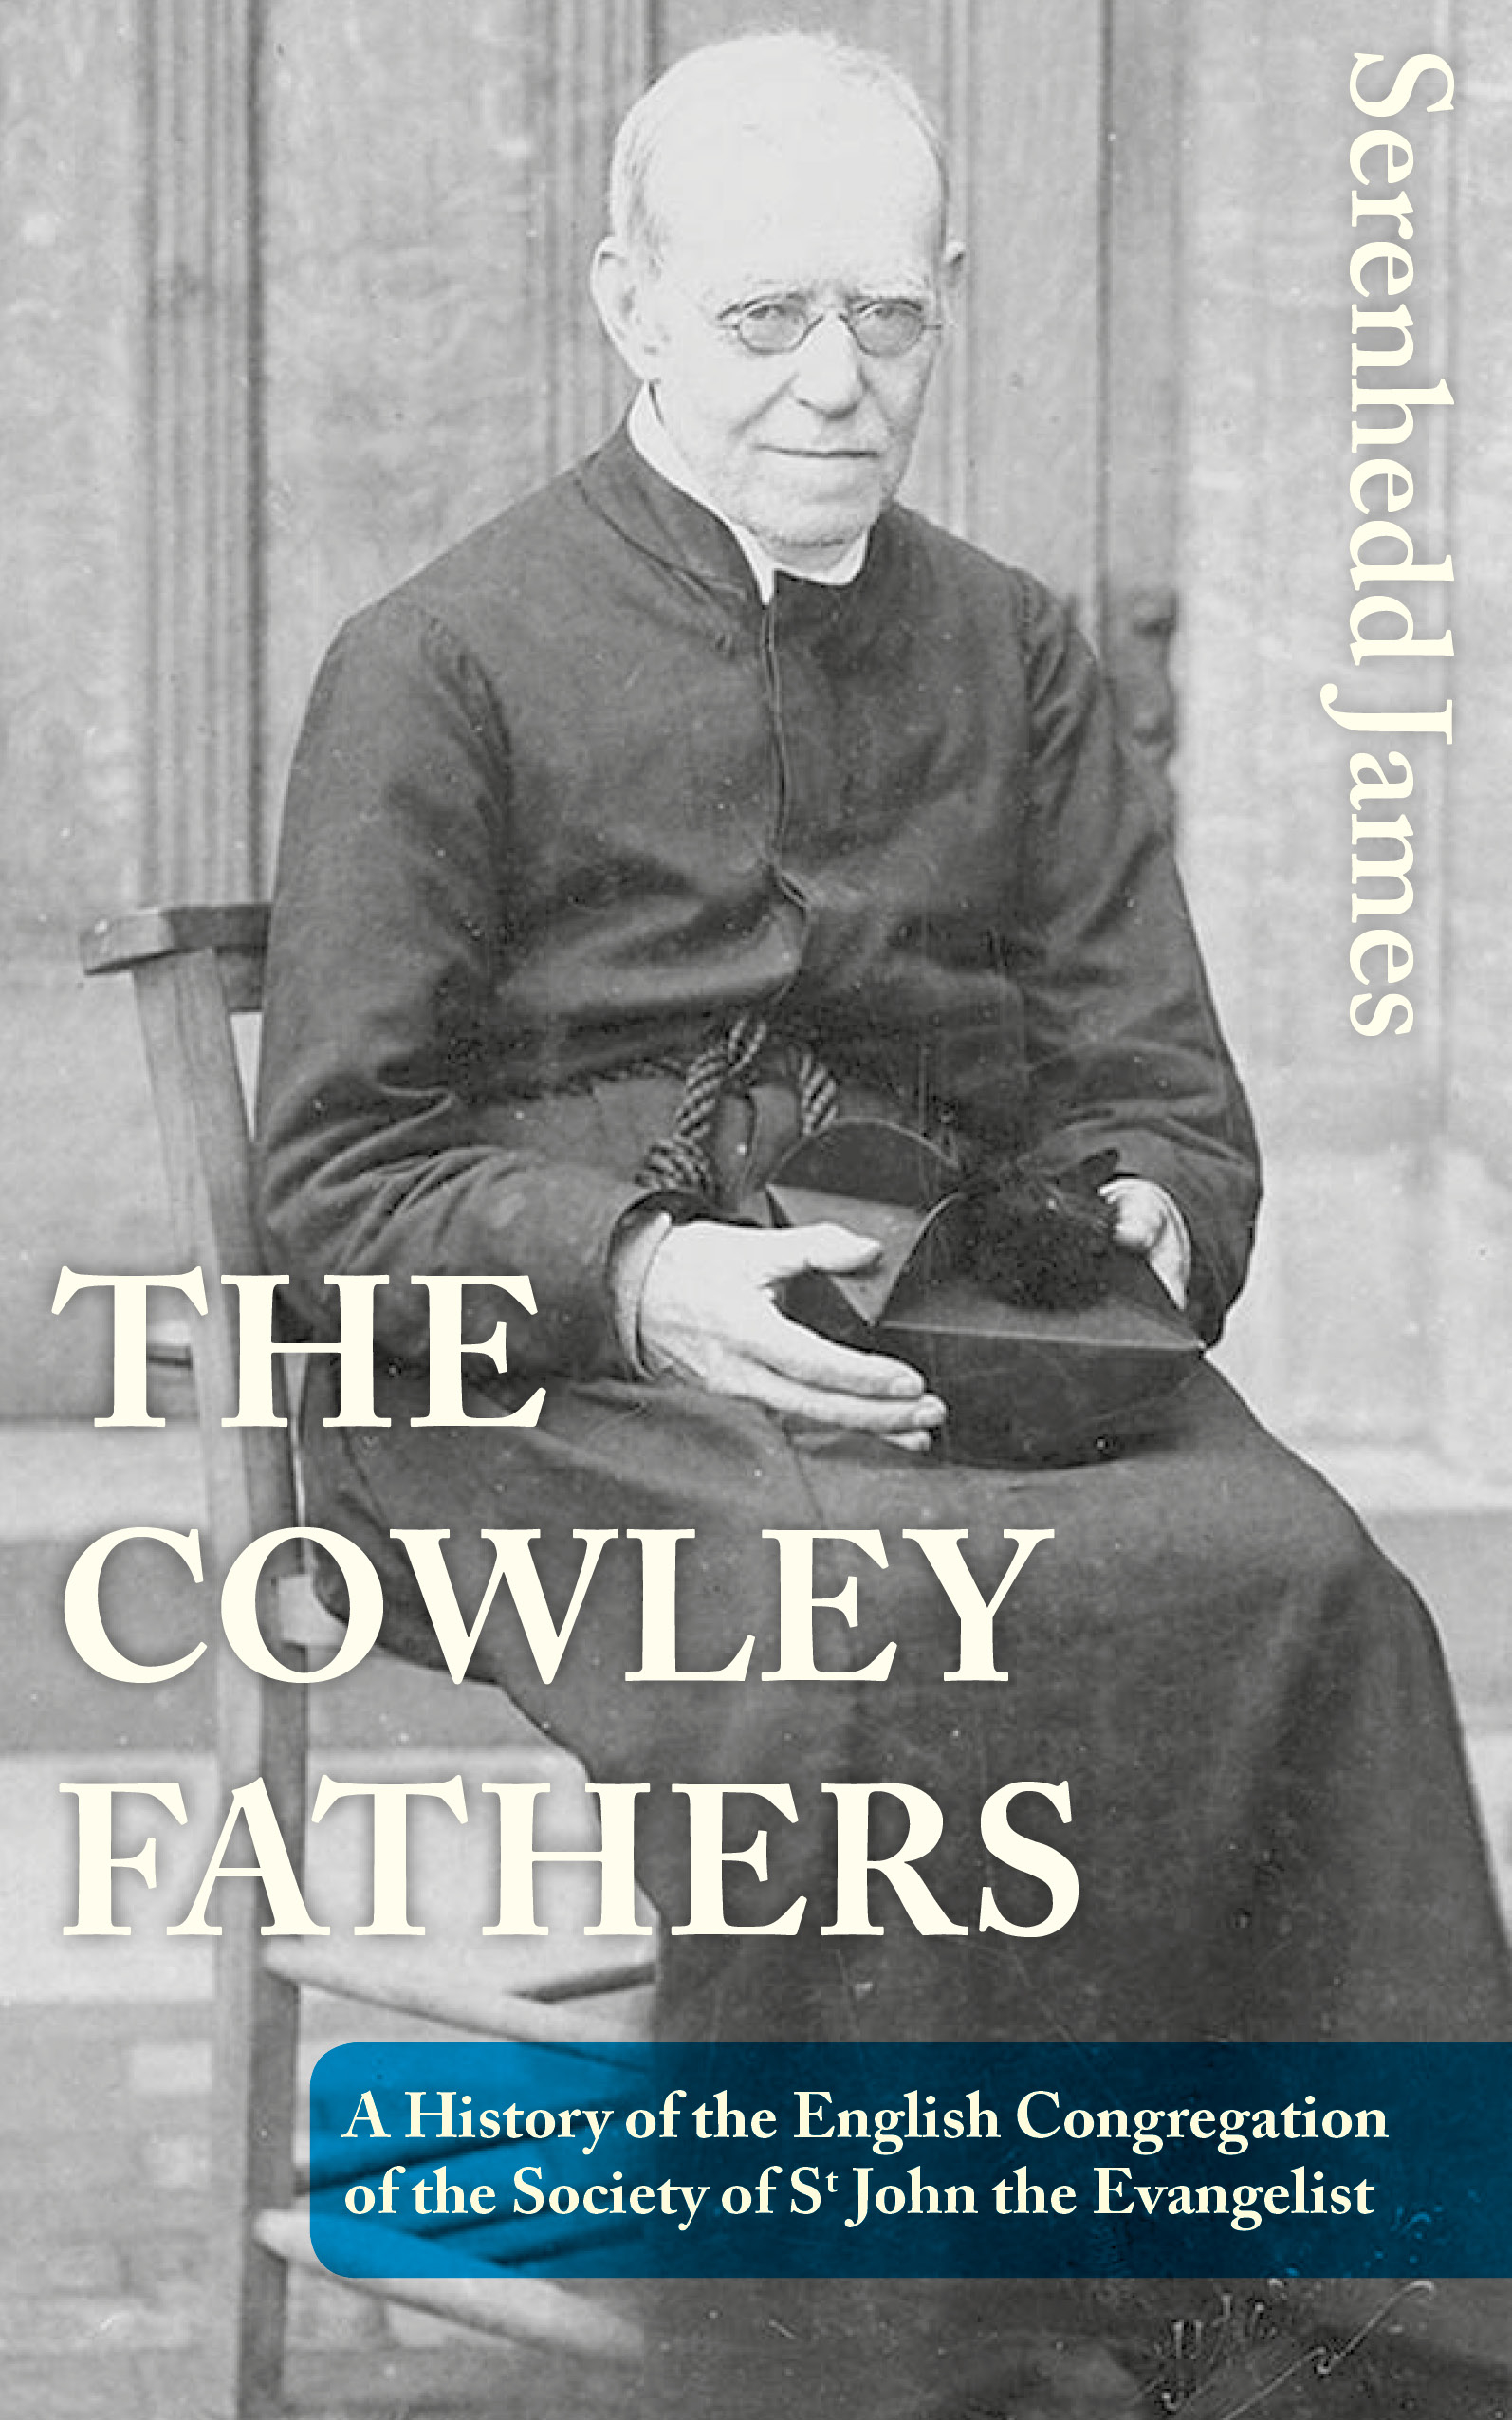 Cowley Fathers